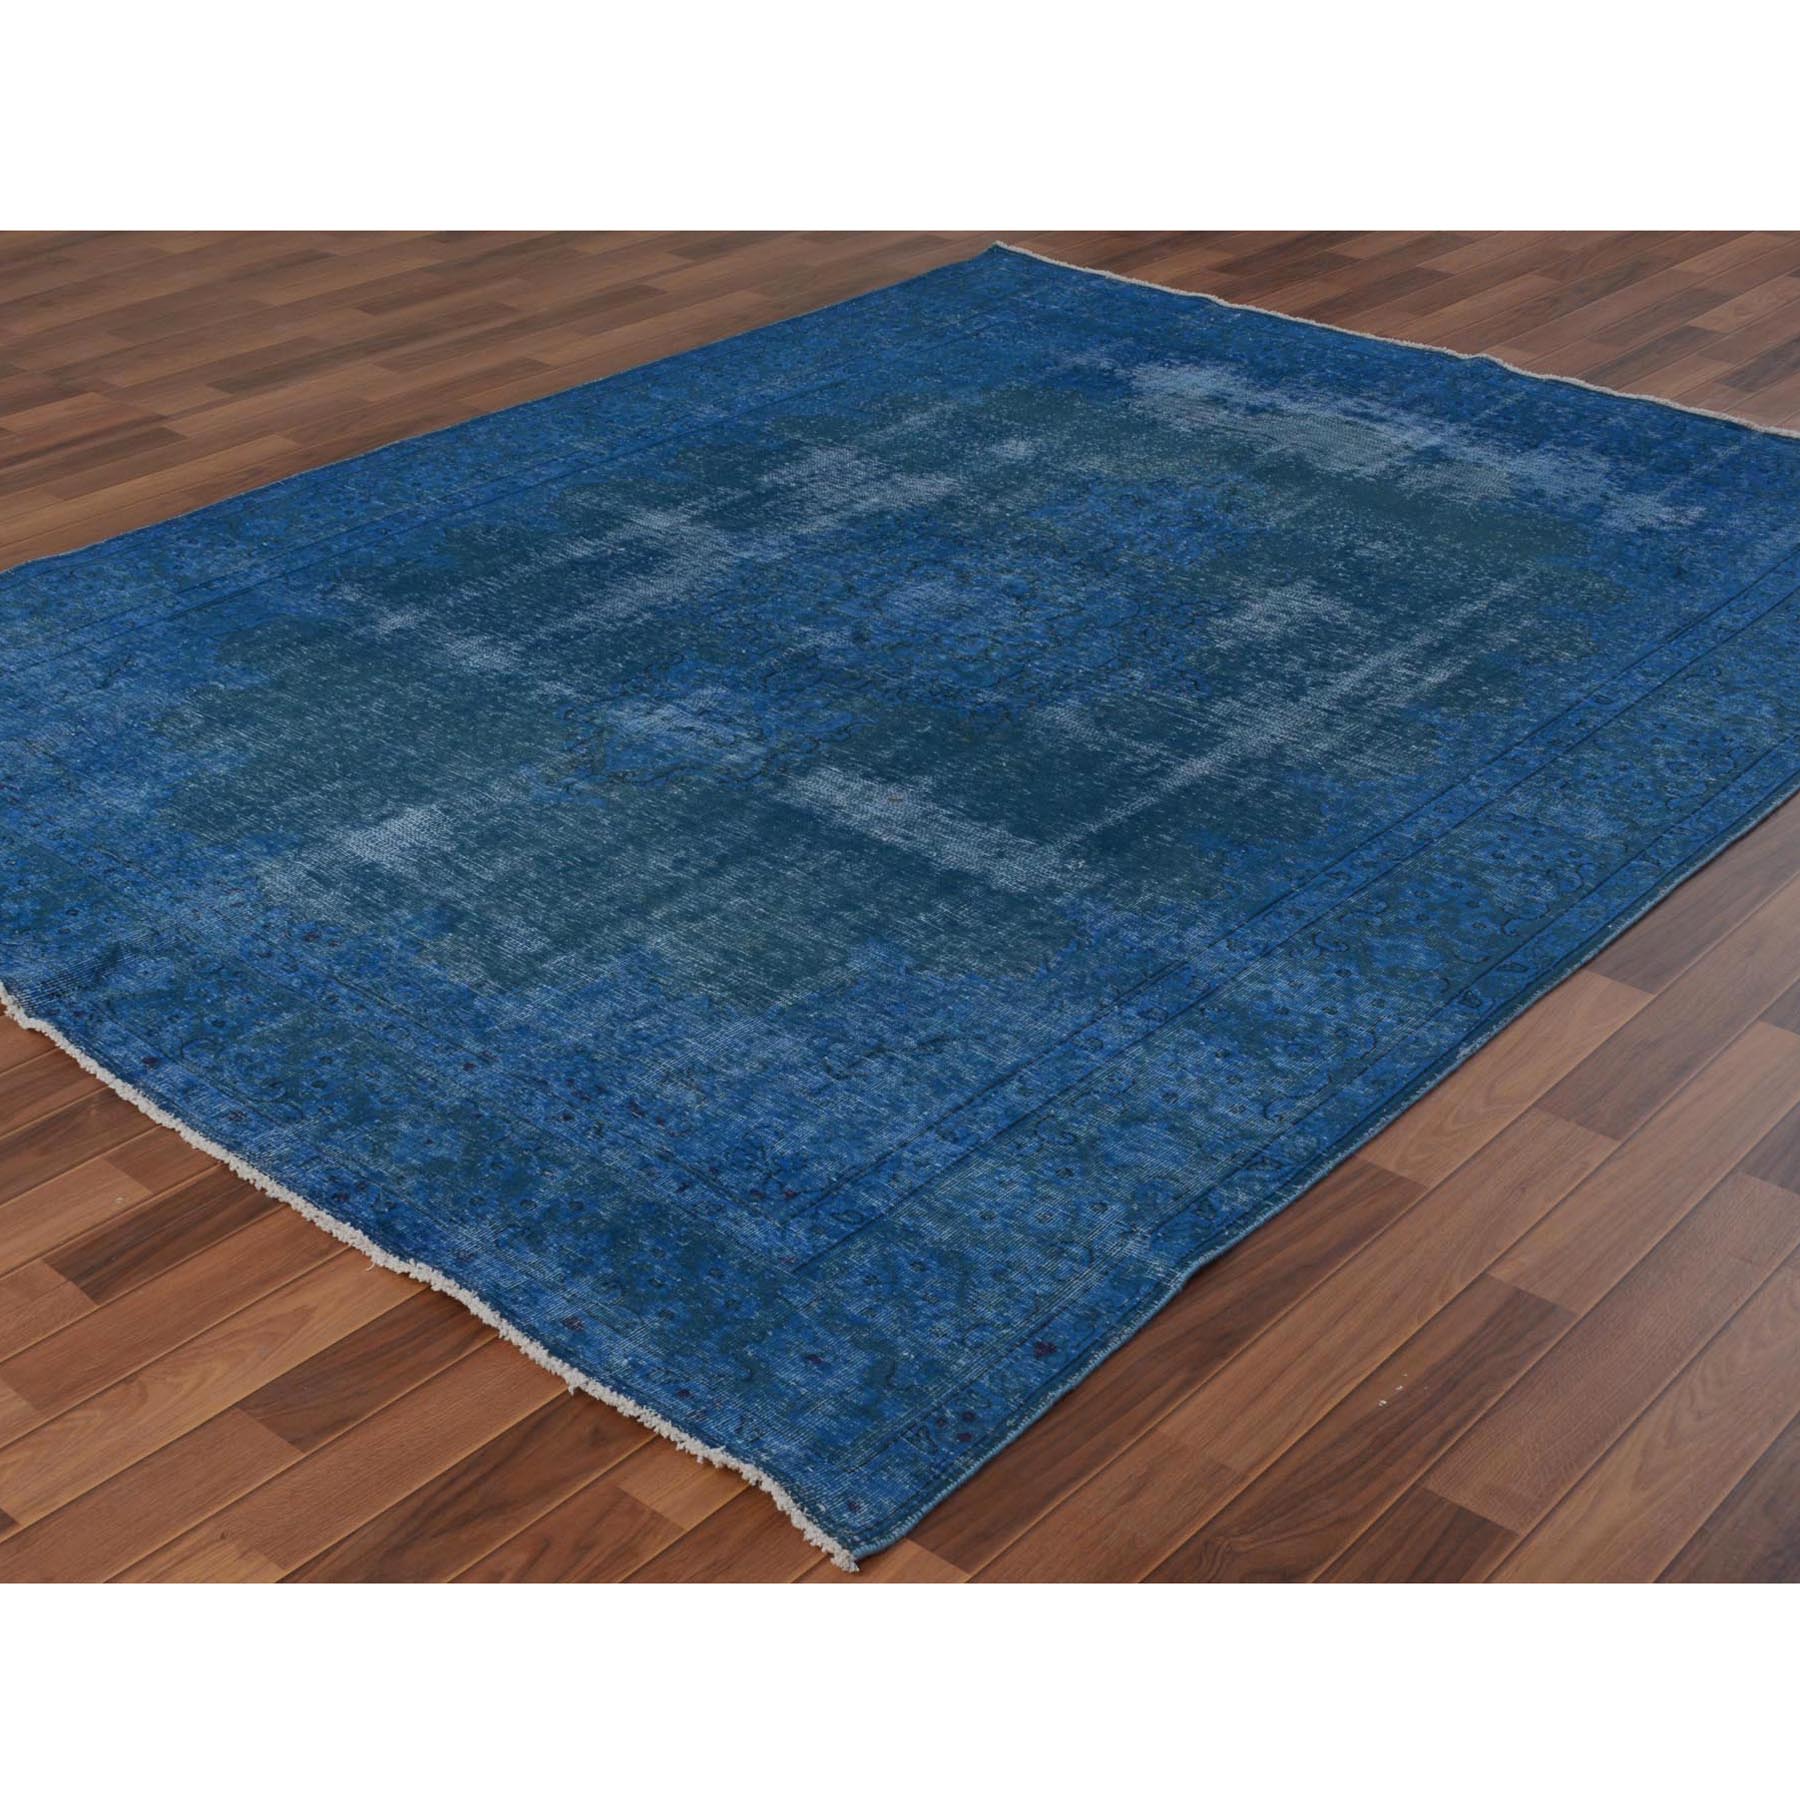 7-x9-3  Blue Overdyed Clean Worn Down Vintage Persian Kerman Pure Wool Hand Knotted Oriental Rug 